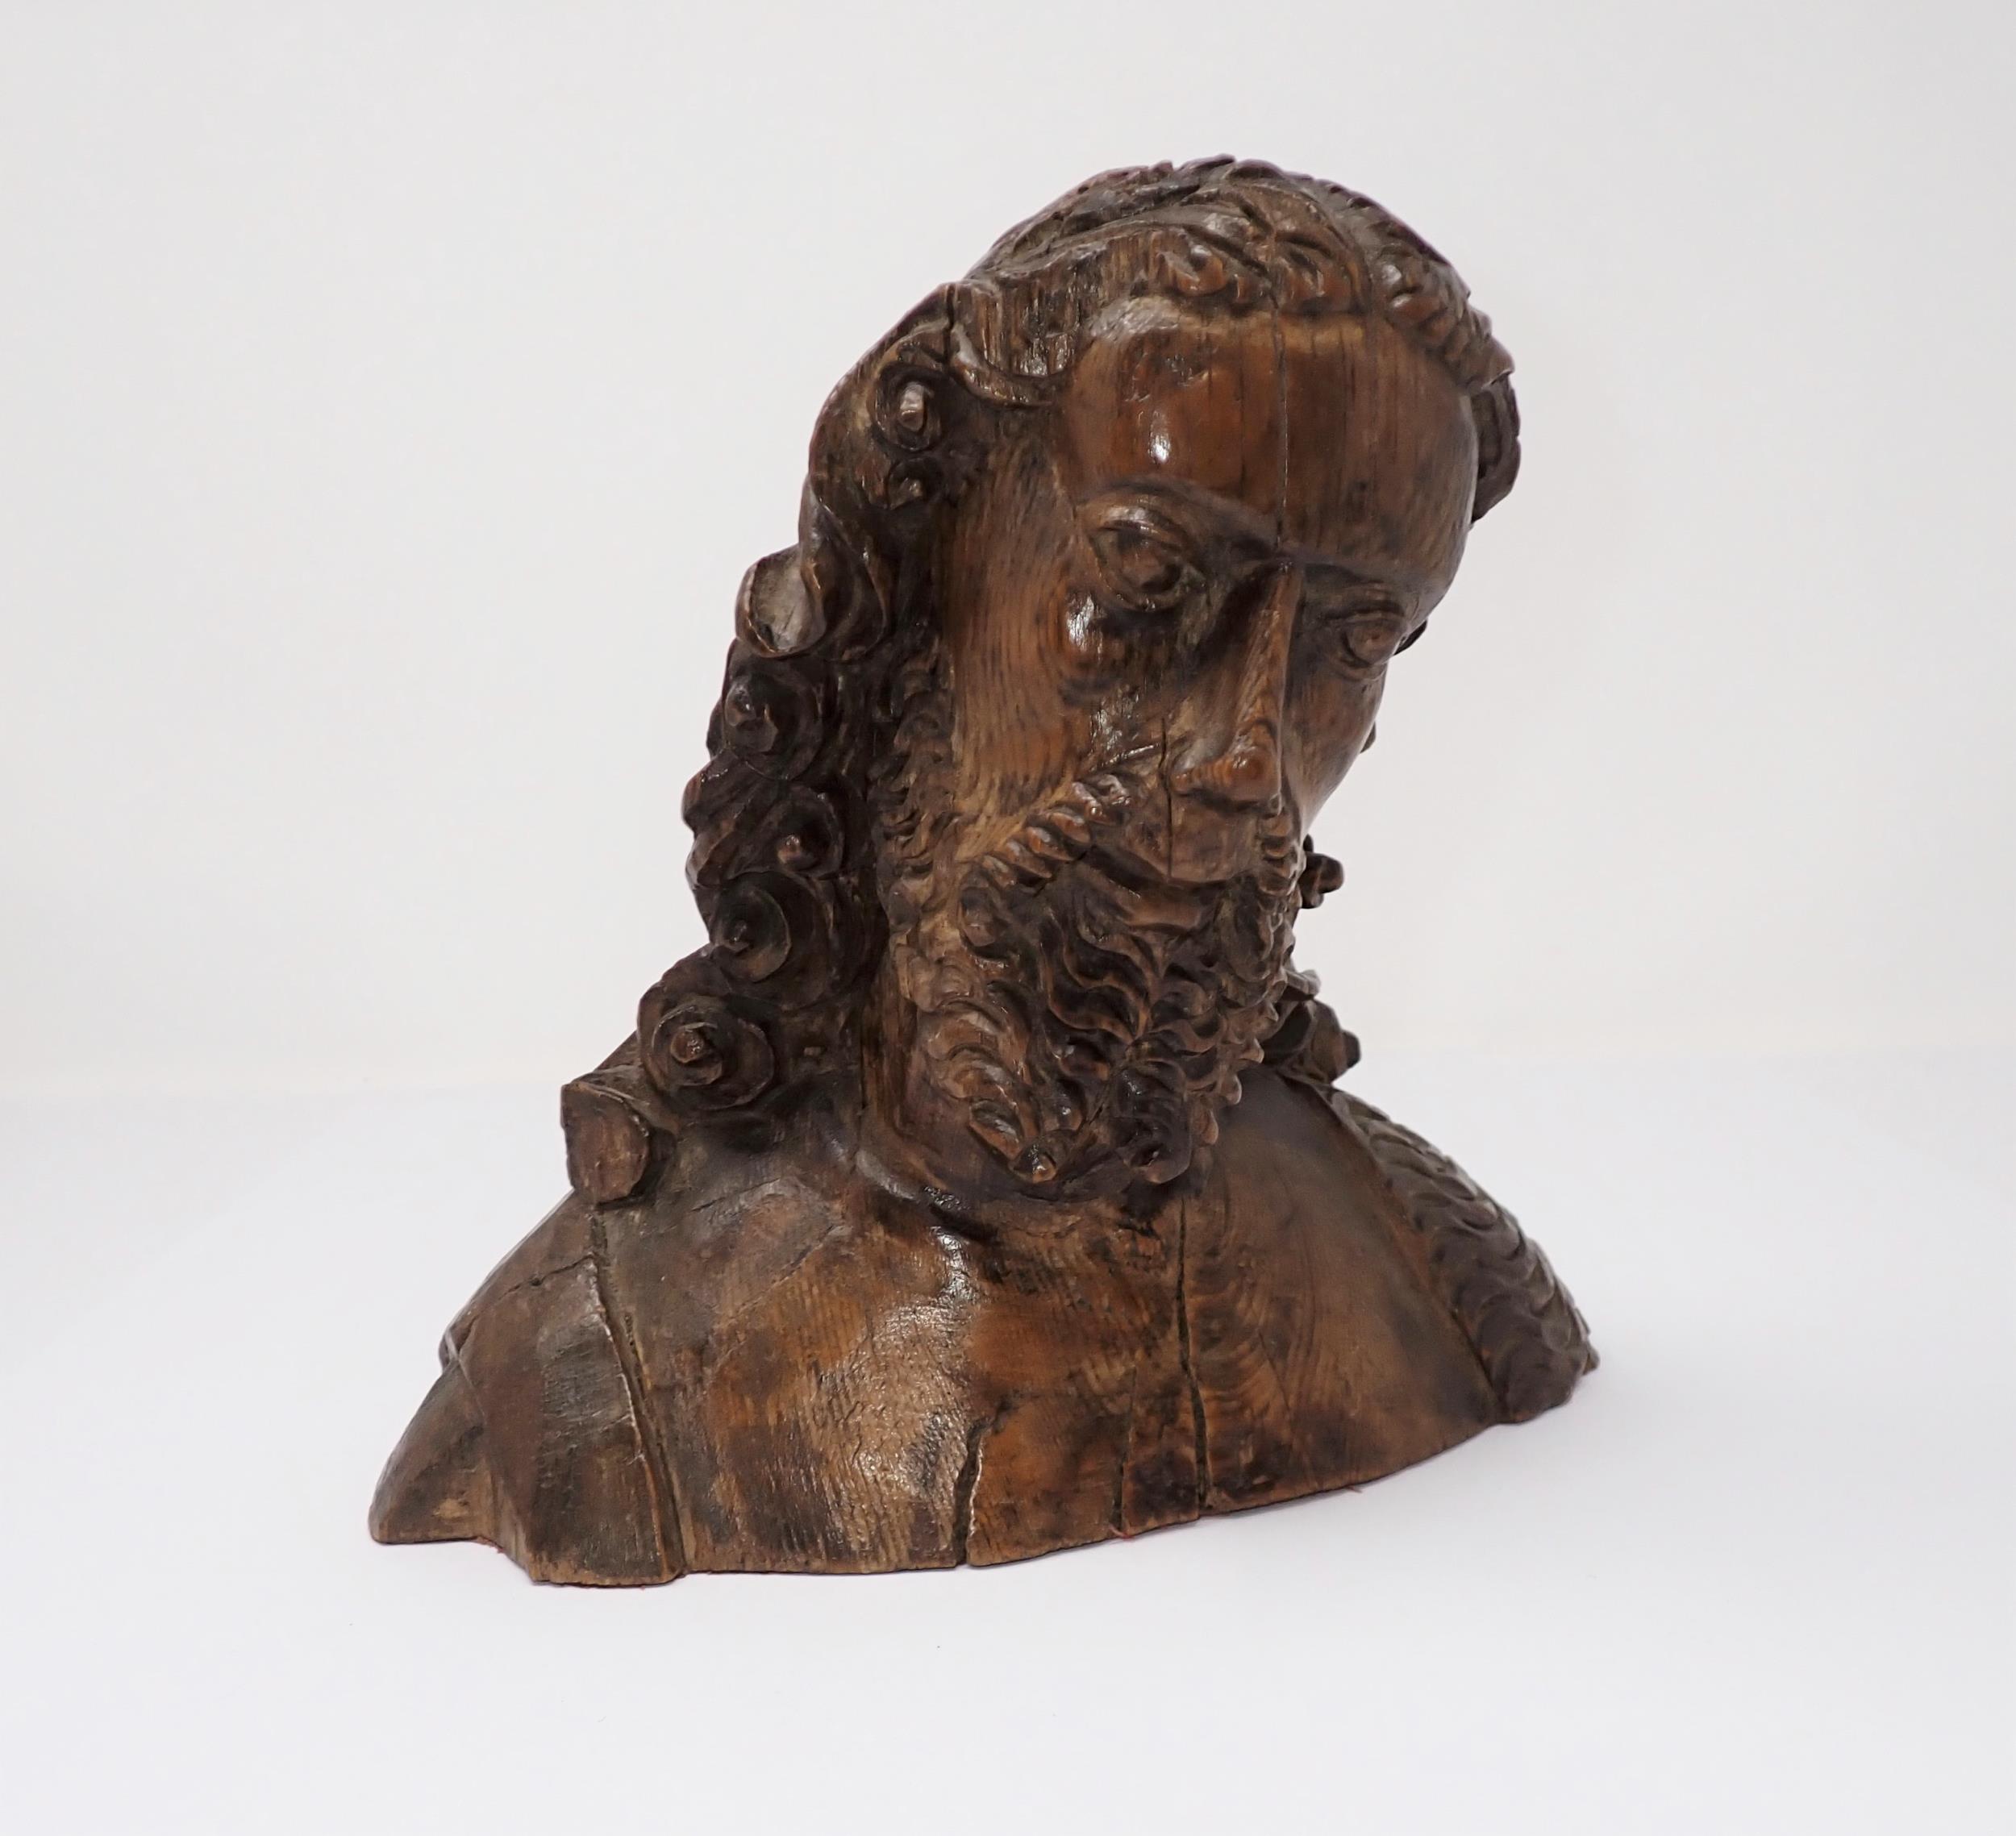 A finely carved wooden Bust, possibly of John the Baptist, with fleece over right shoulder, possibly